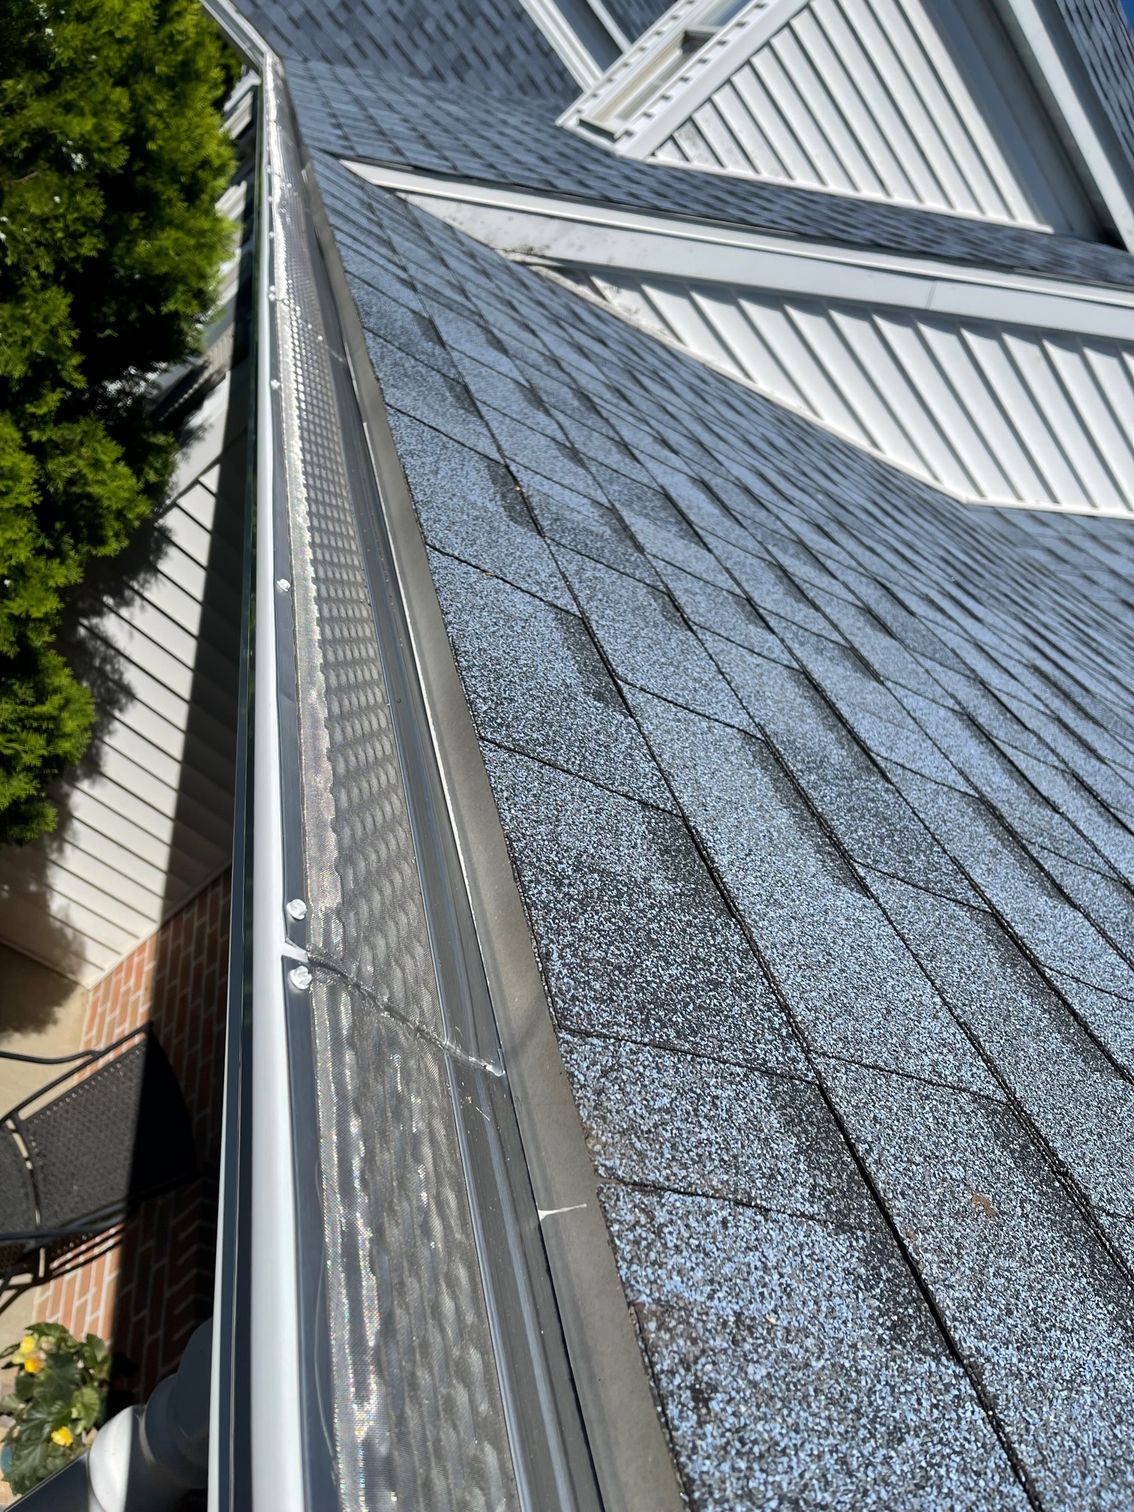 A Variety of Gutter Styles to Choose From